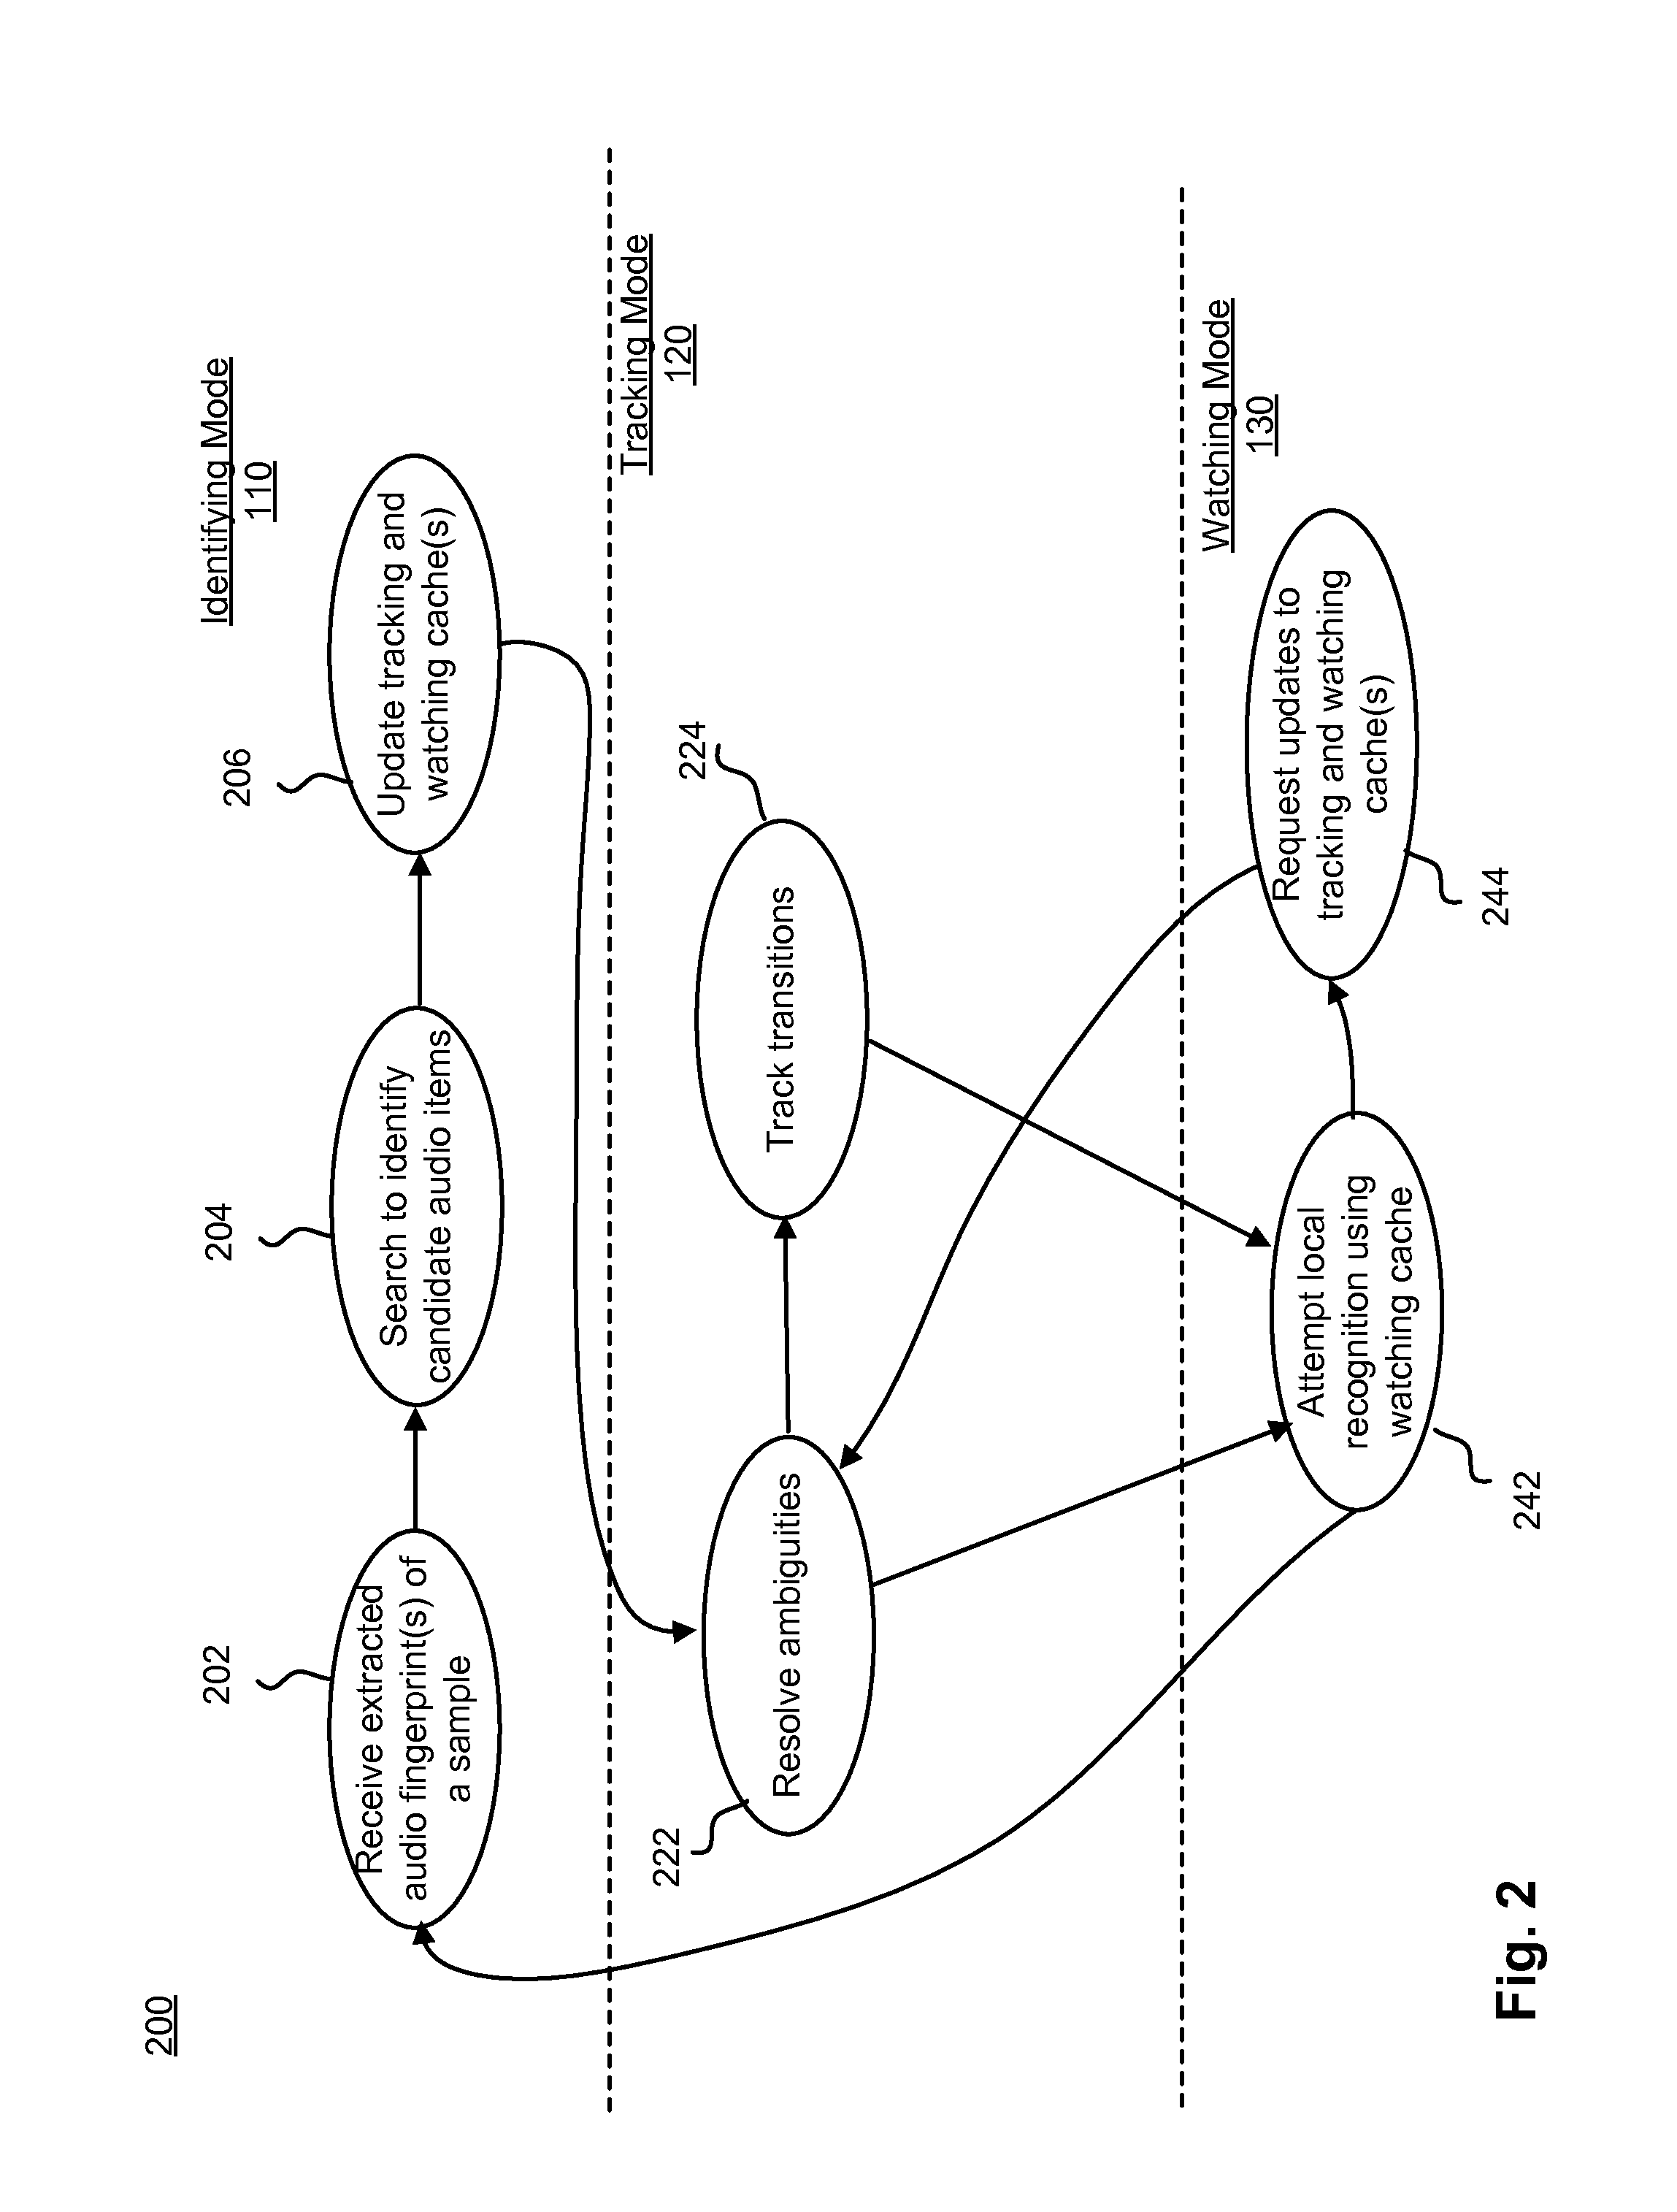 System and methods for continuous audio matching